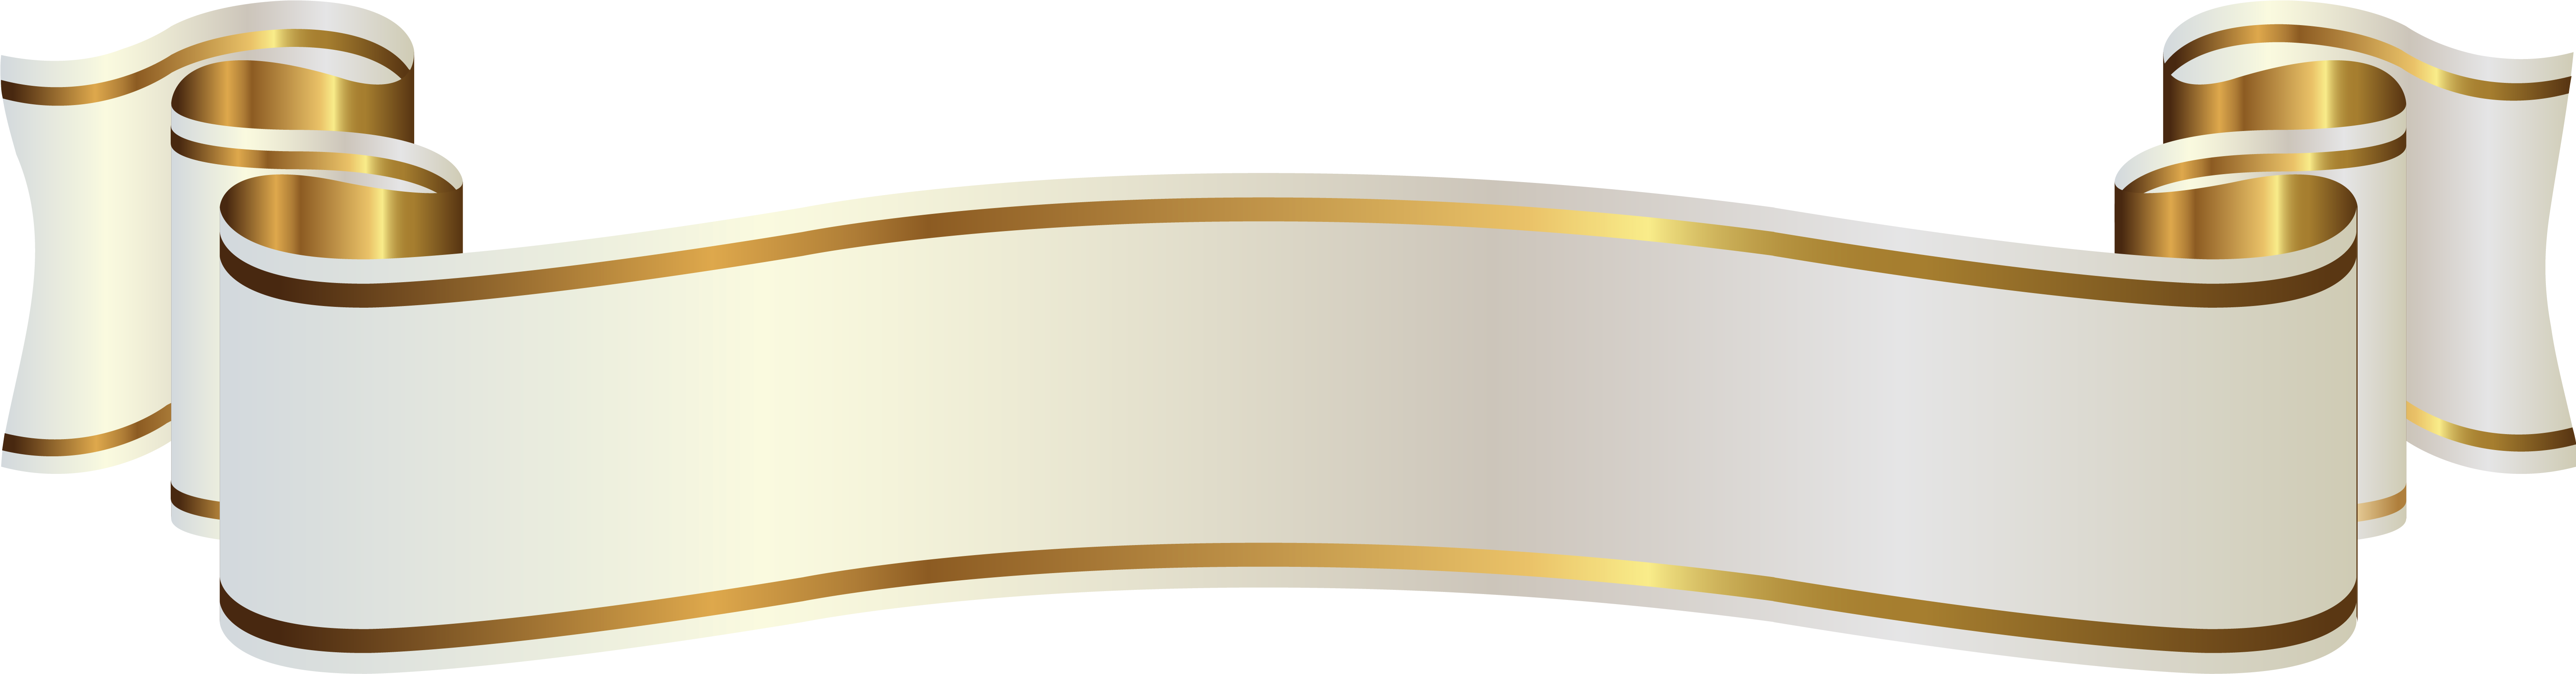 Gold Banner Png 6157 X 1610